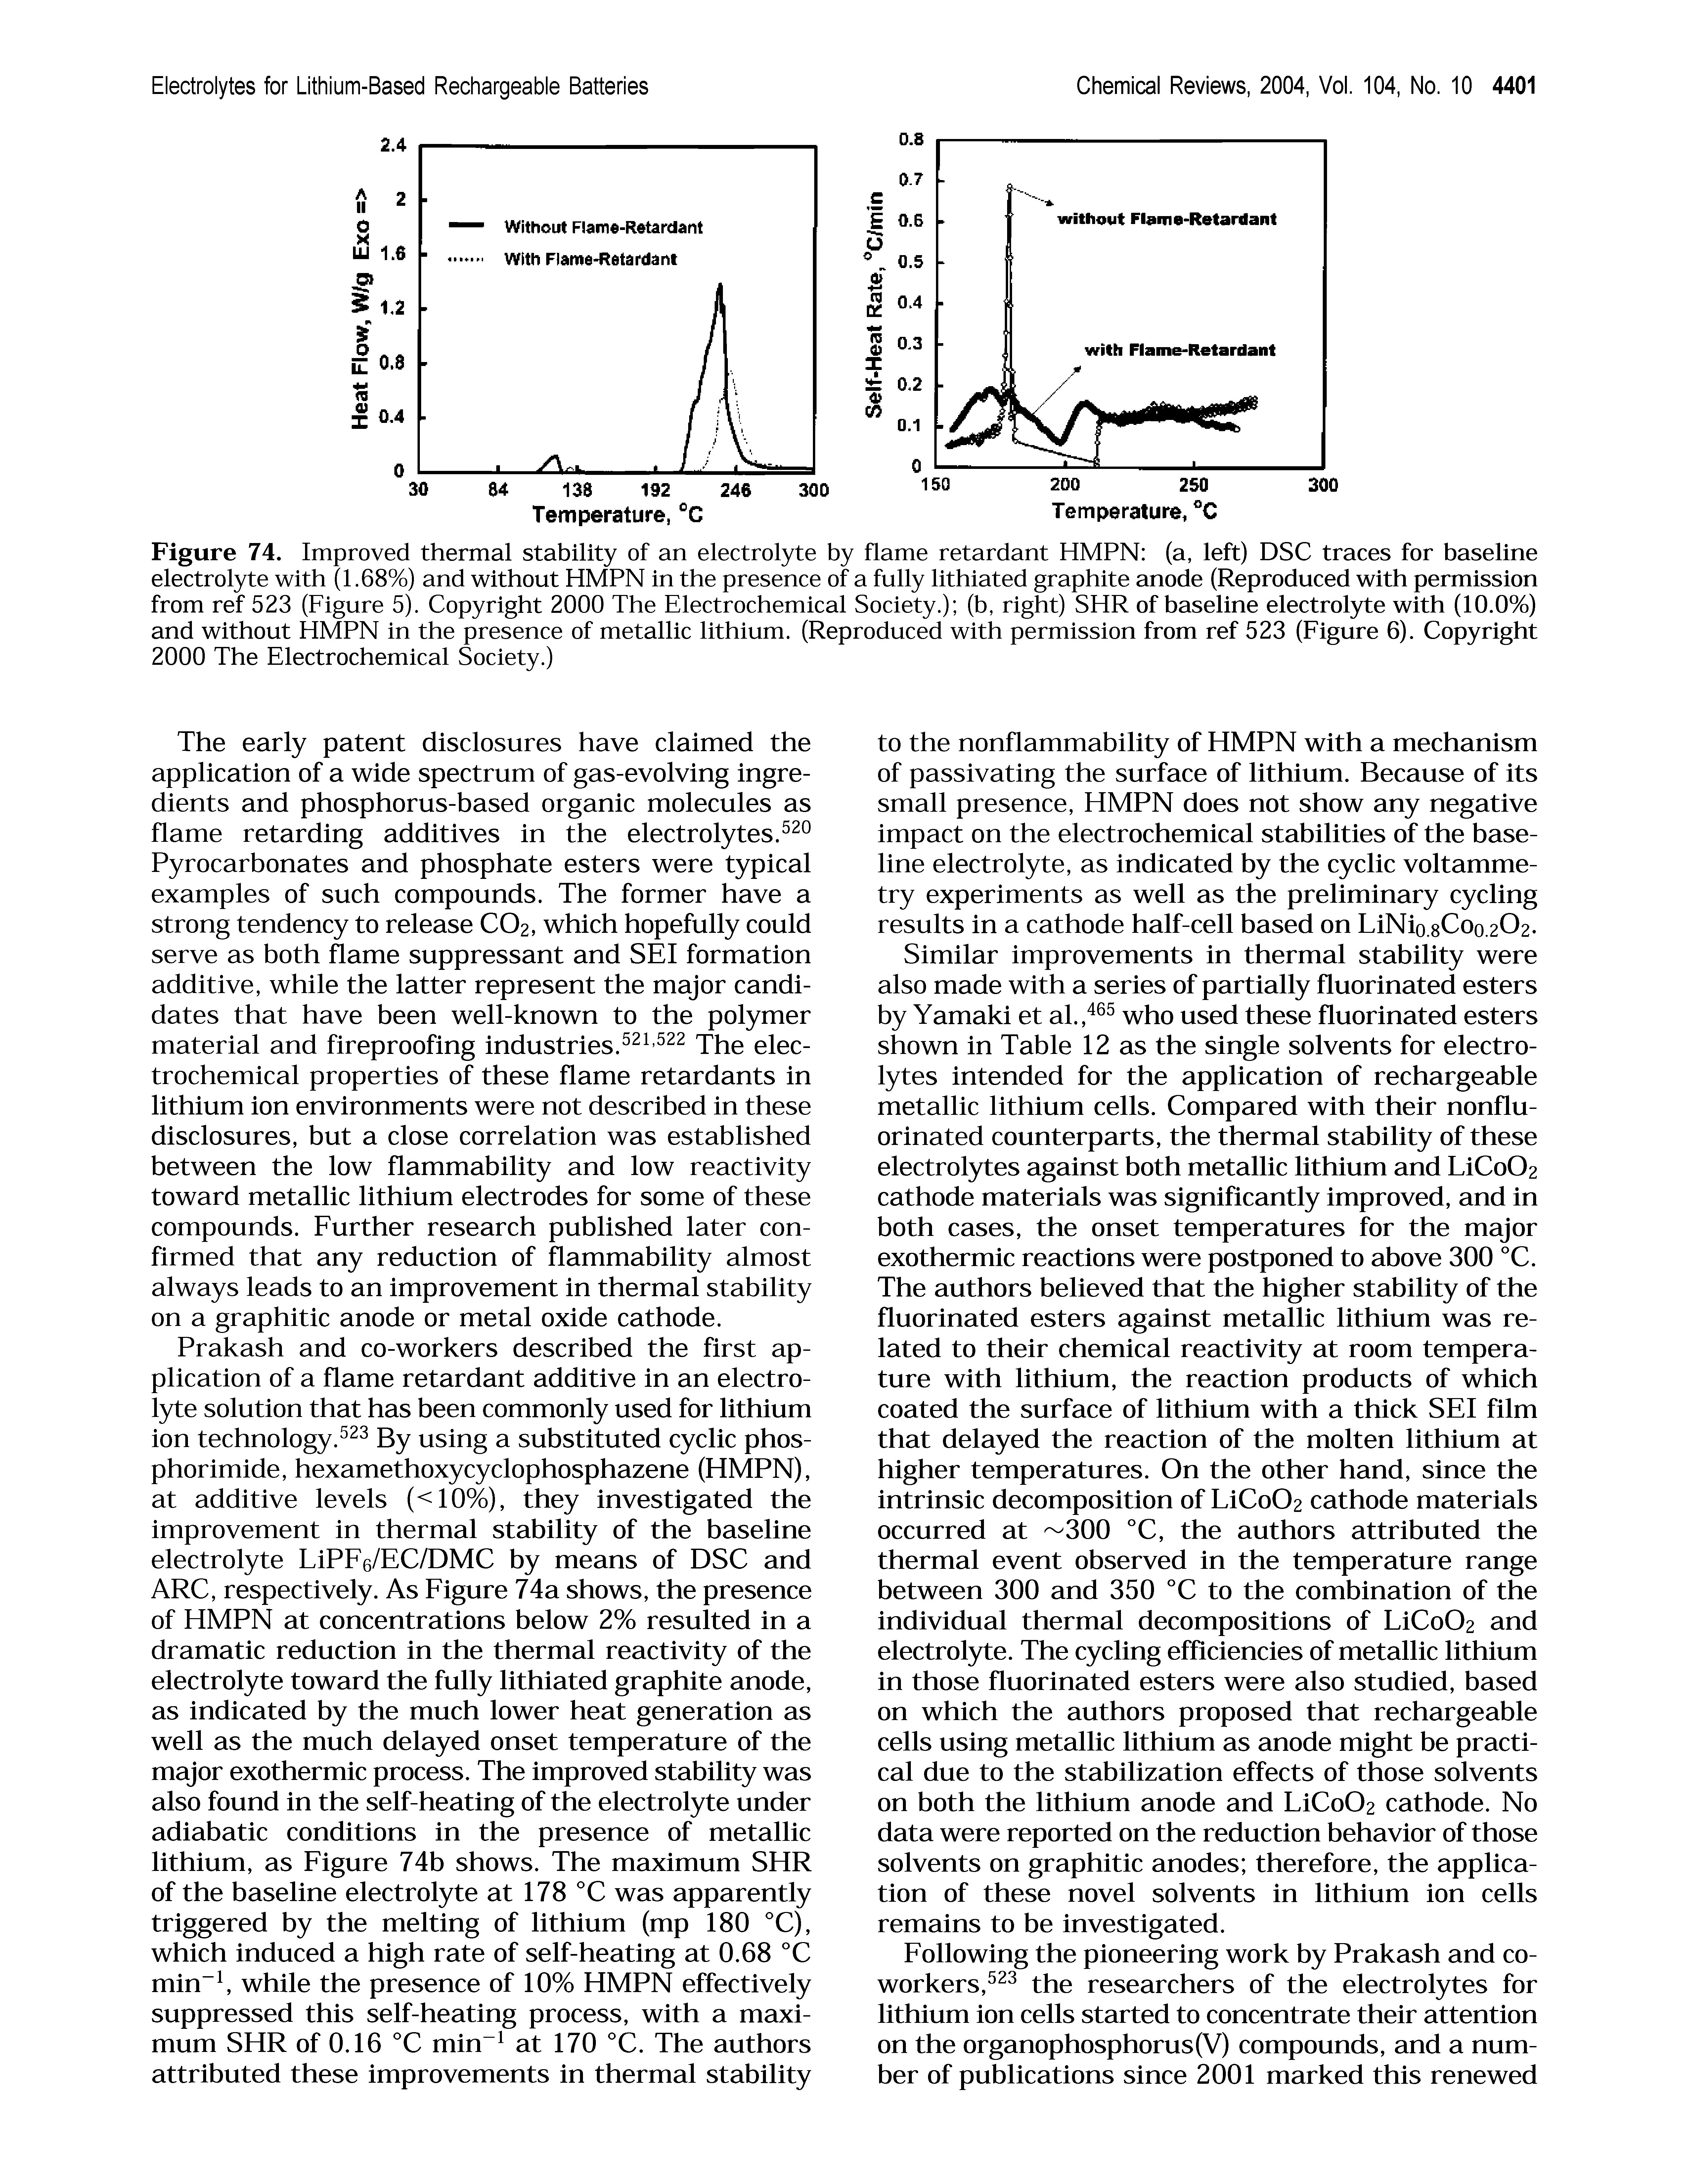 Figure 74. Improved thermal stability of an electrolyte by flame retardant HMPN (a, left) DSC traces for baseline electrolyte with (1.68%) and without HMPN in the presence of a fully lithiated graphite anode (Reproduced with permission from ref 523 (Figure 5). Copyright 2000 The Electrochemical Society.) (b, right) SHR of baseline electrolyte with (10.0%) and without HMPN in the presence of metallic lithium. (Reproduced with permission from ref 523 (Figure 6). Copyright 2000 The Electrochemical Society.)...